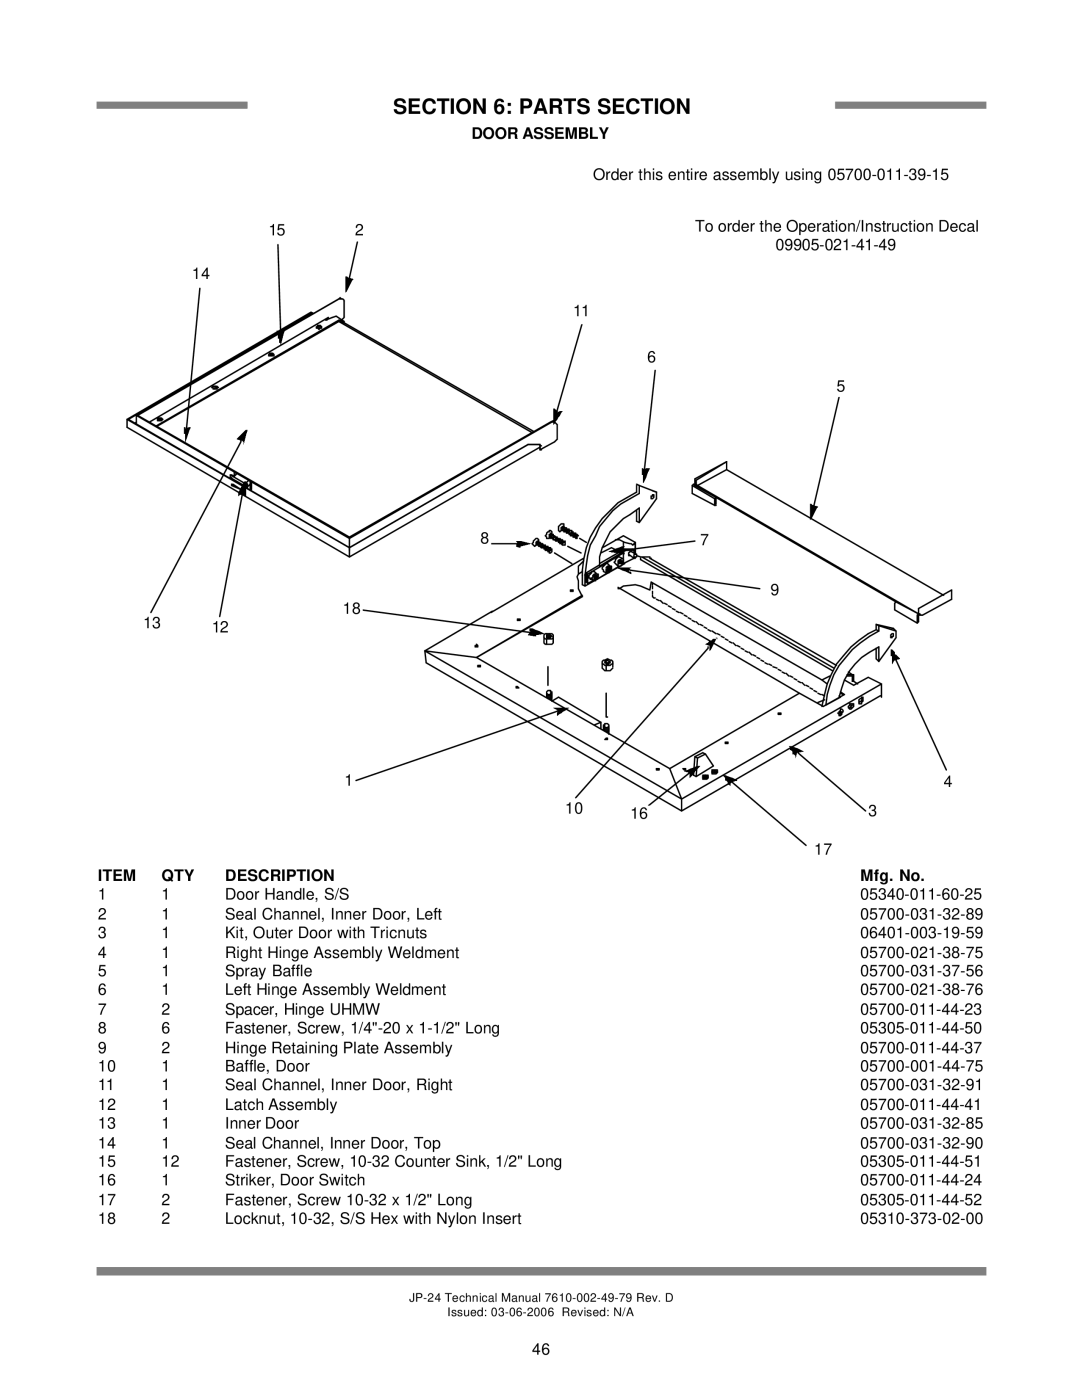 Jackson JP-24F, jp-24b, JP-24BF Door Assembly, Parts Section, Order this entire assembly using, Description, Mfg. No 